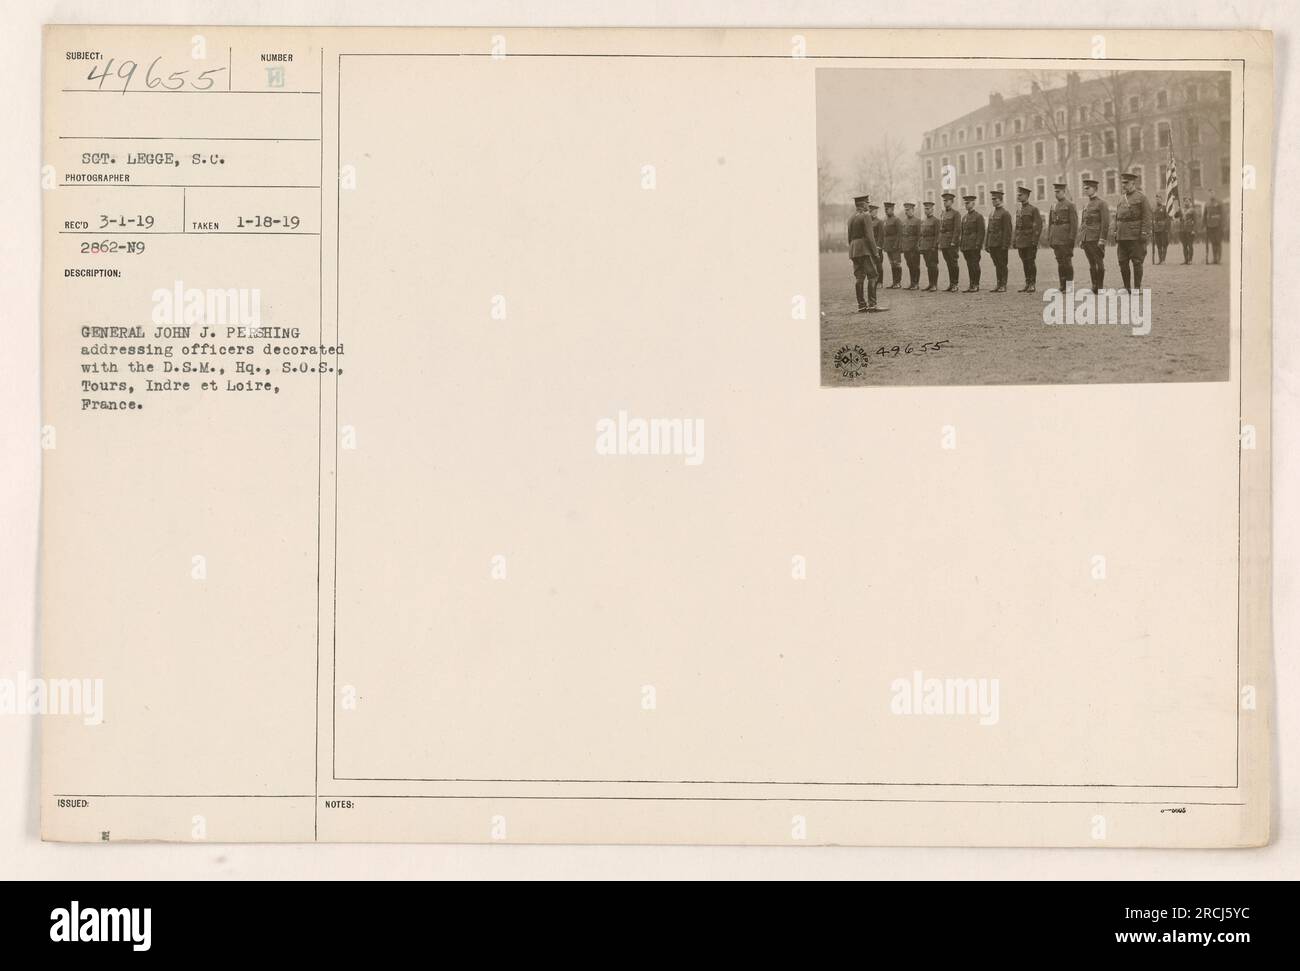 General John J. Pershing addressing officers decorated with the